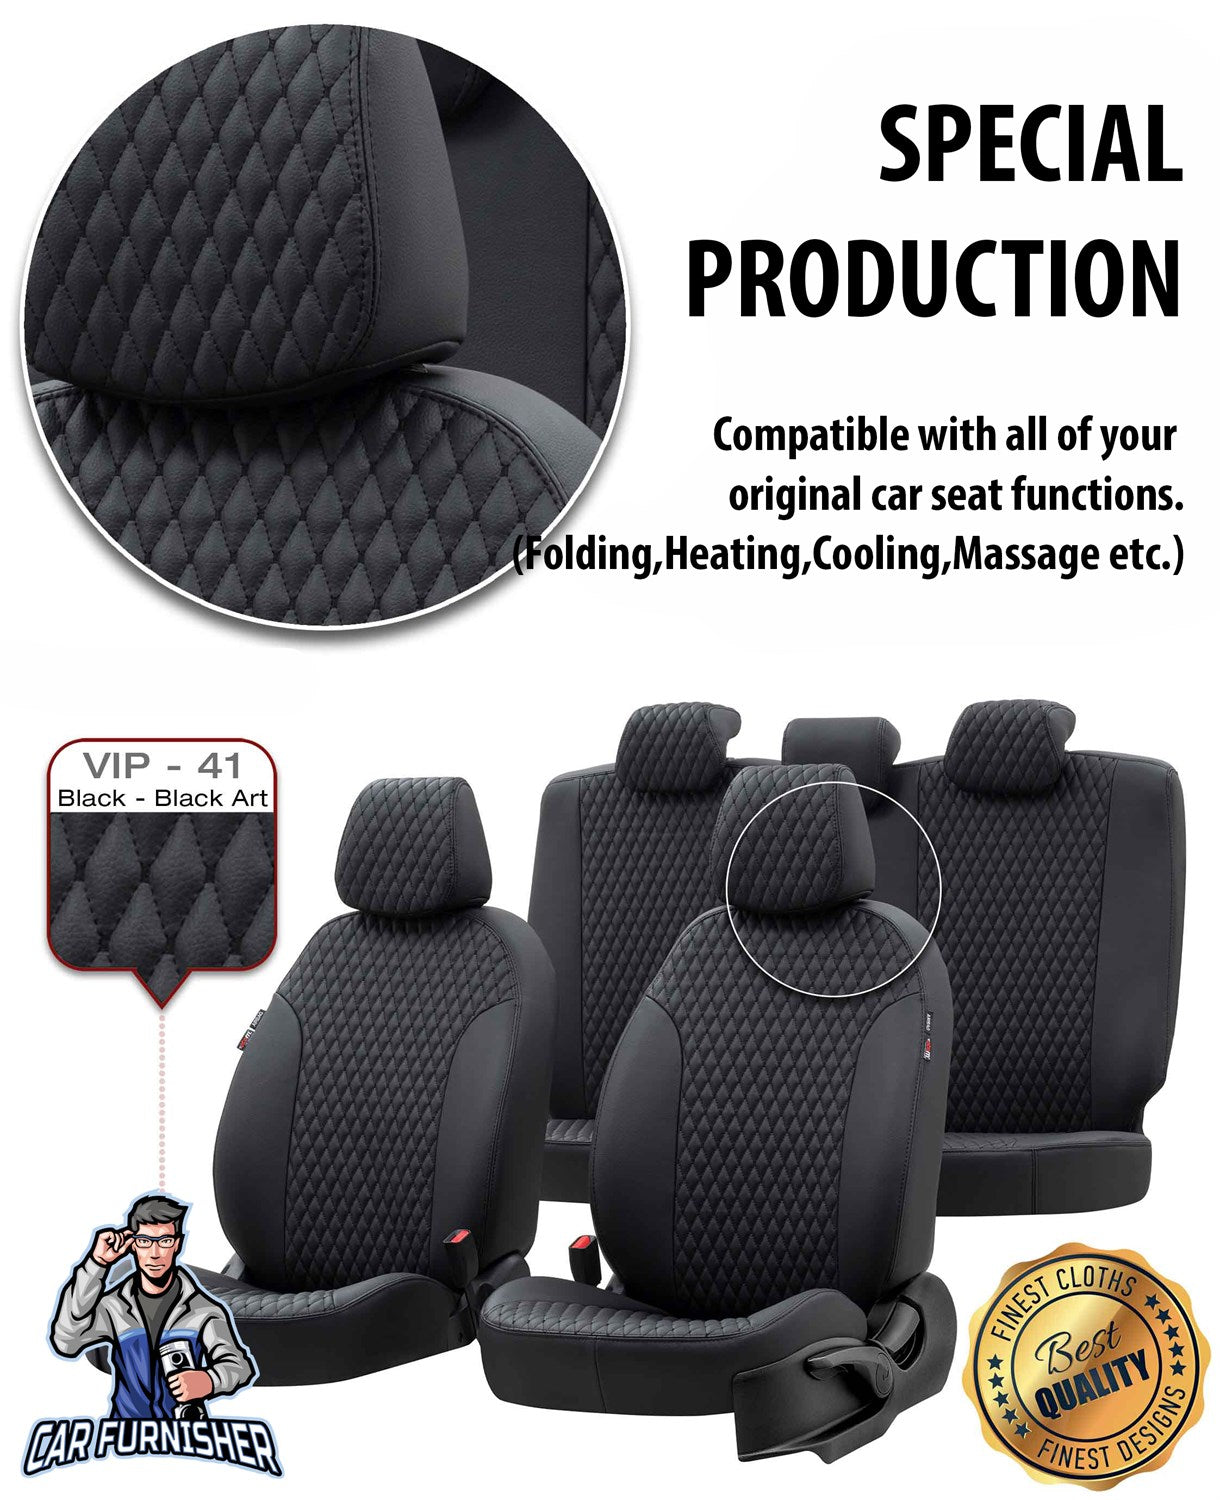 Mercedes GLC Class Seat Covers Amsterdam Leather Design Smoked Black Leather